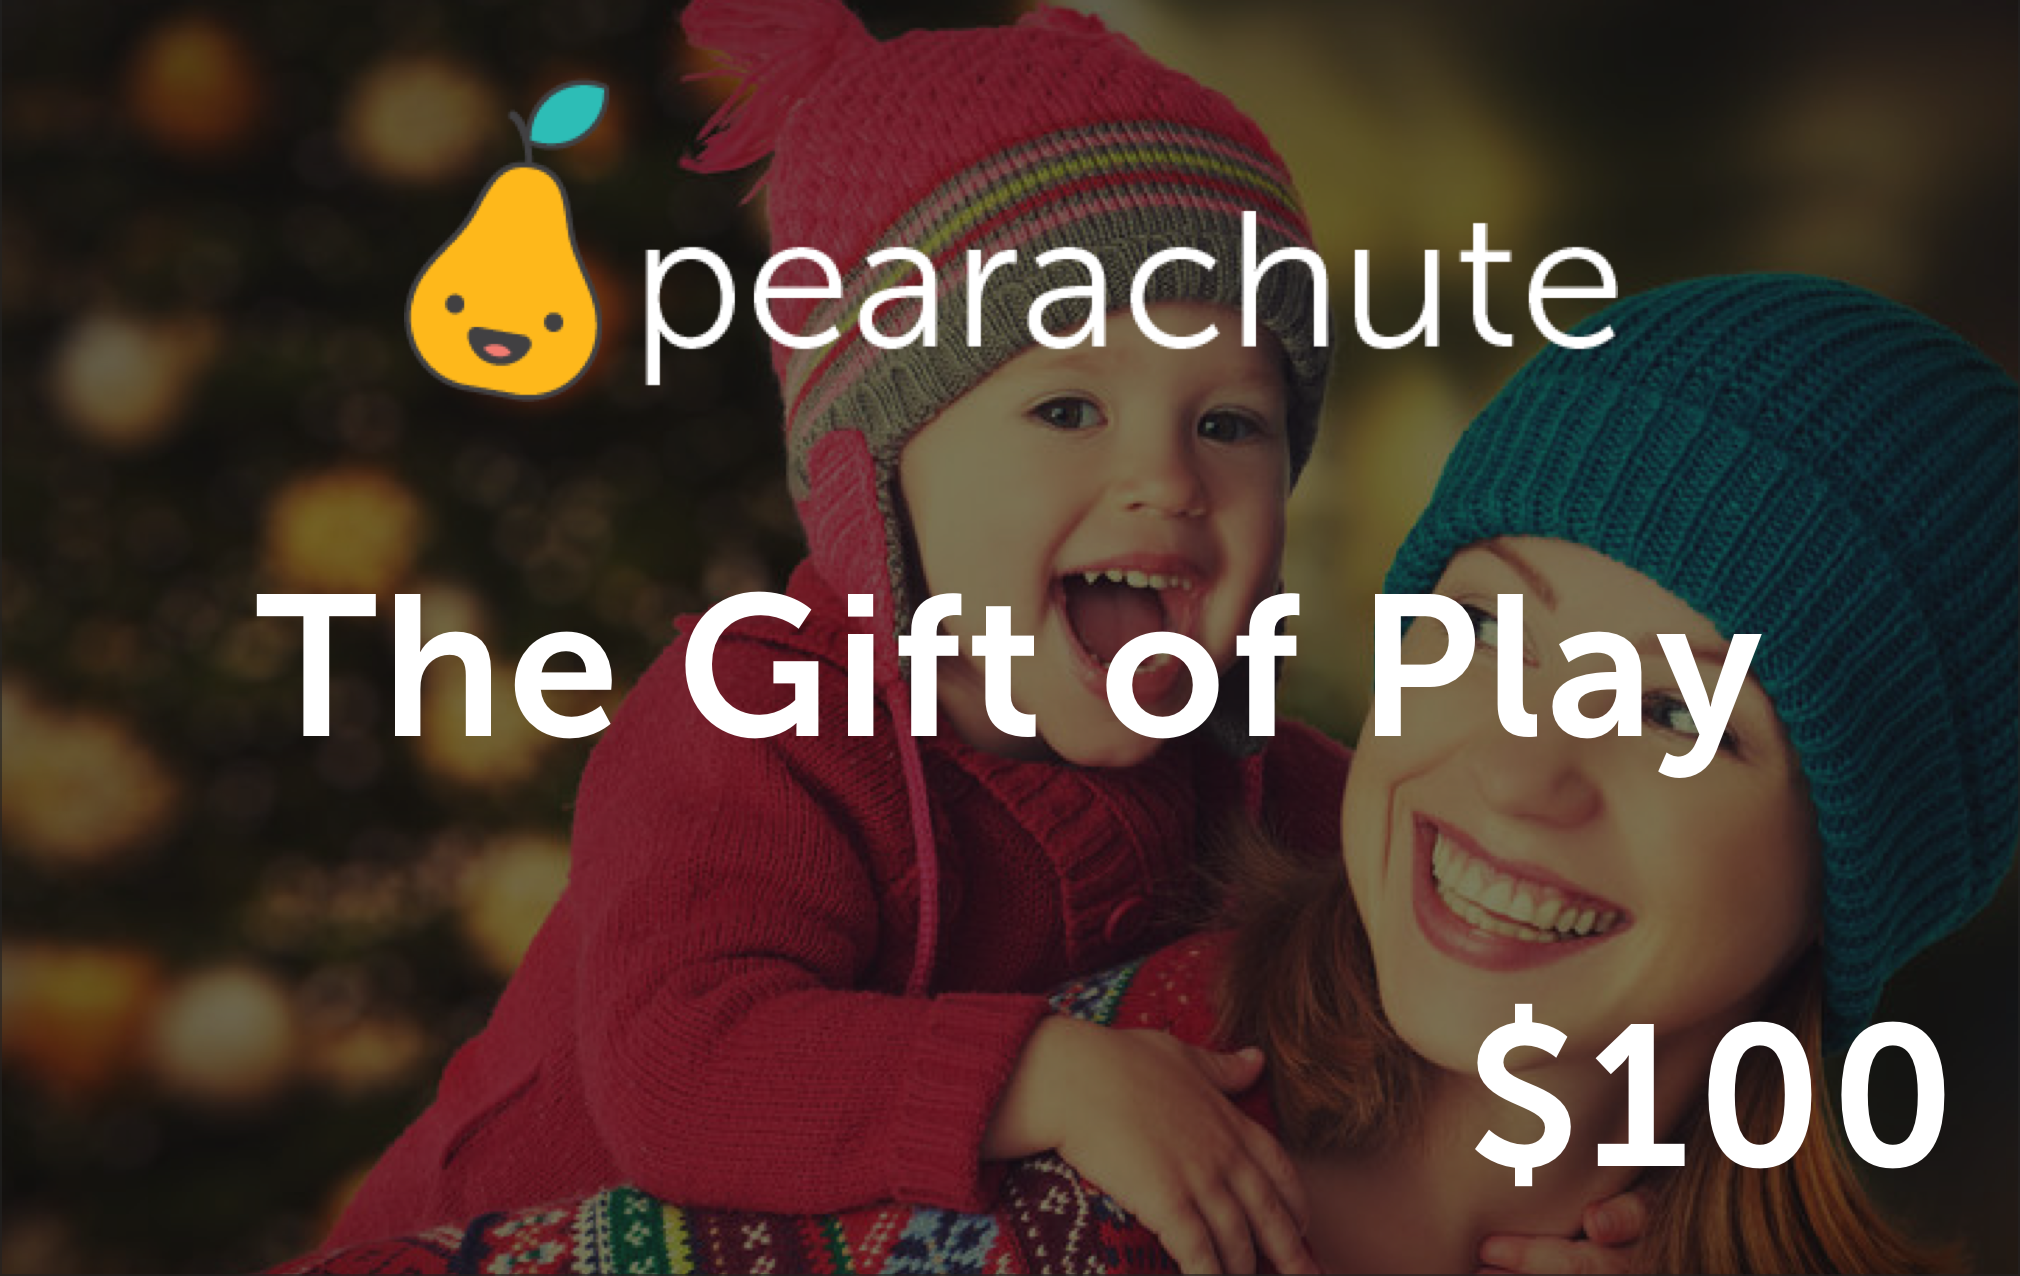 Pearachute makes a great gift for Chicago families to enjoy kids classes throughout the city